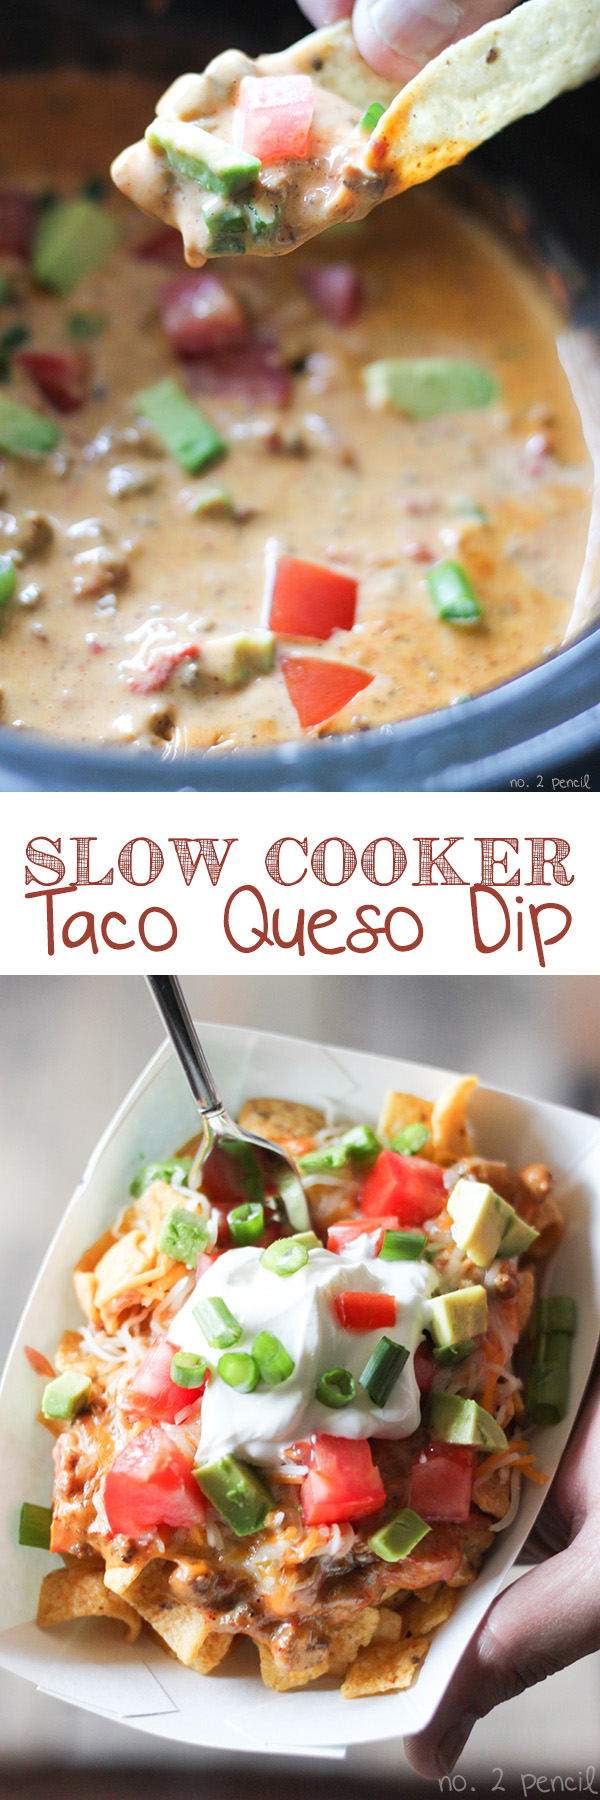 Slow-Cooker-Taco-Queso-Dip